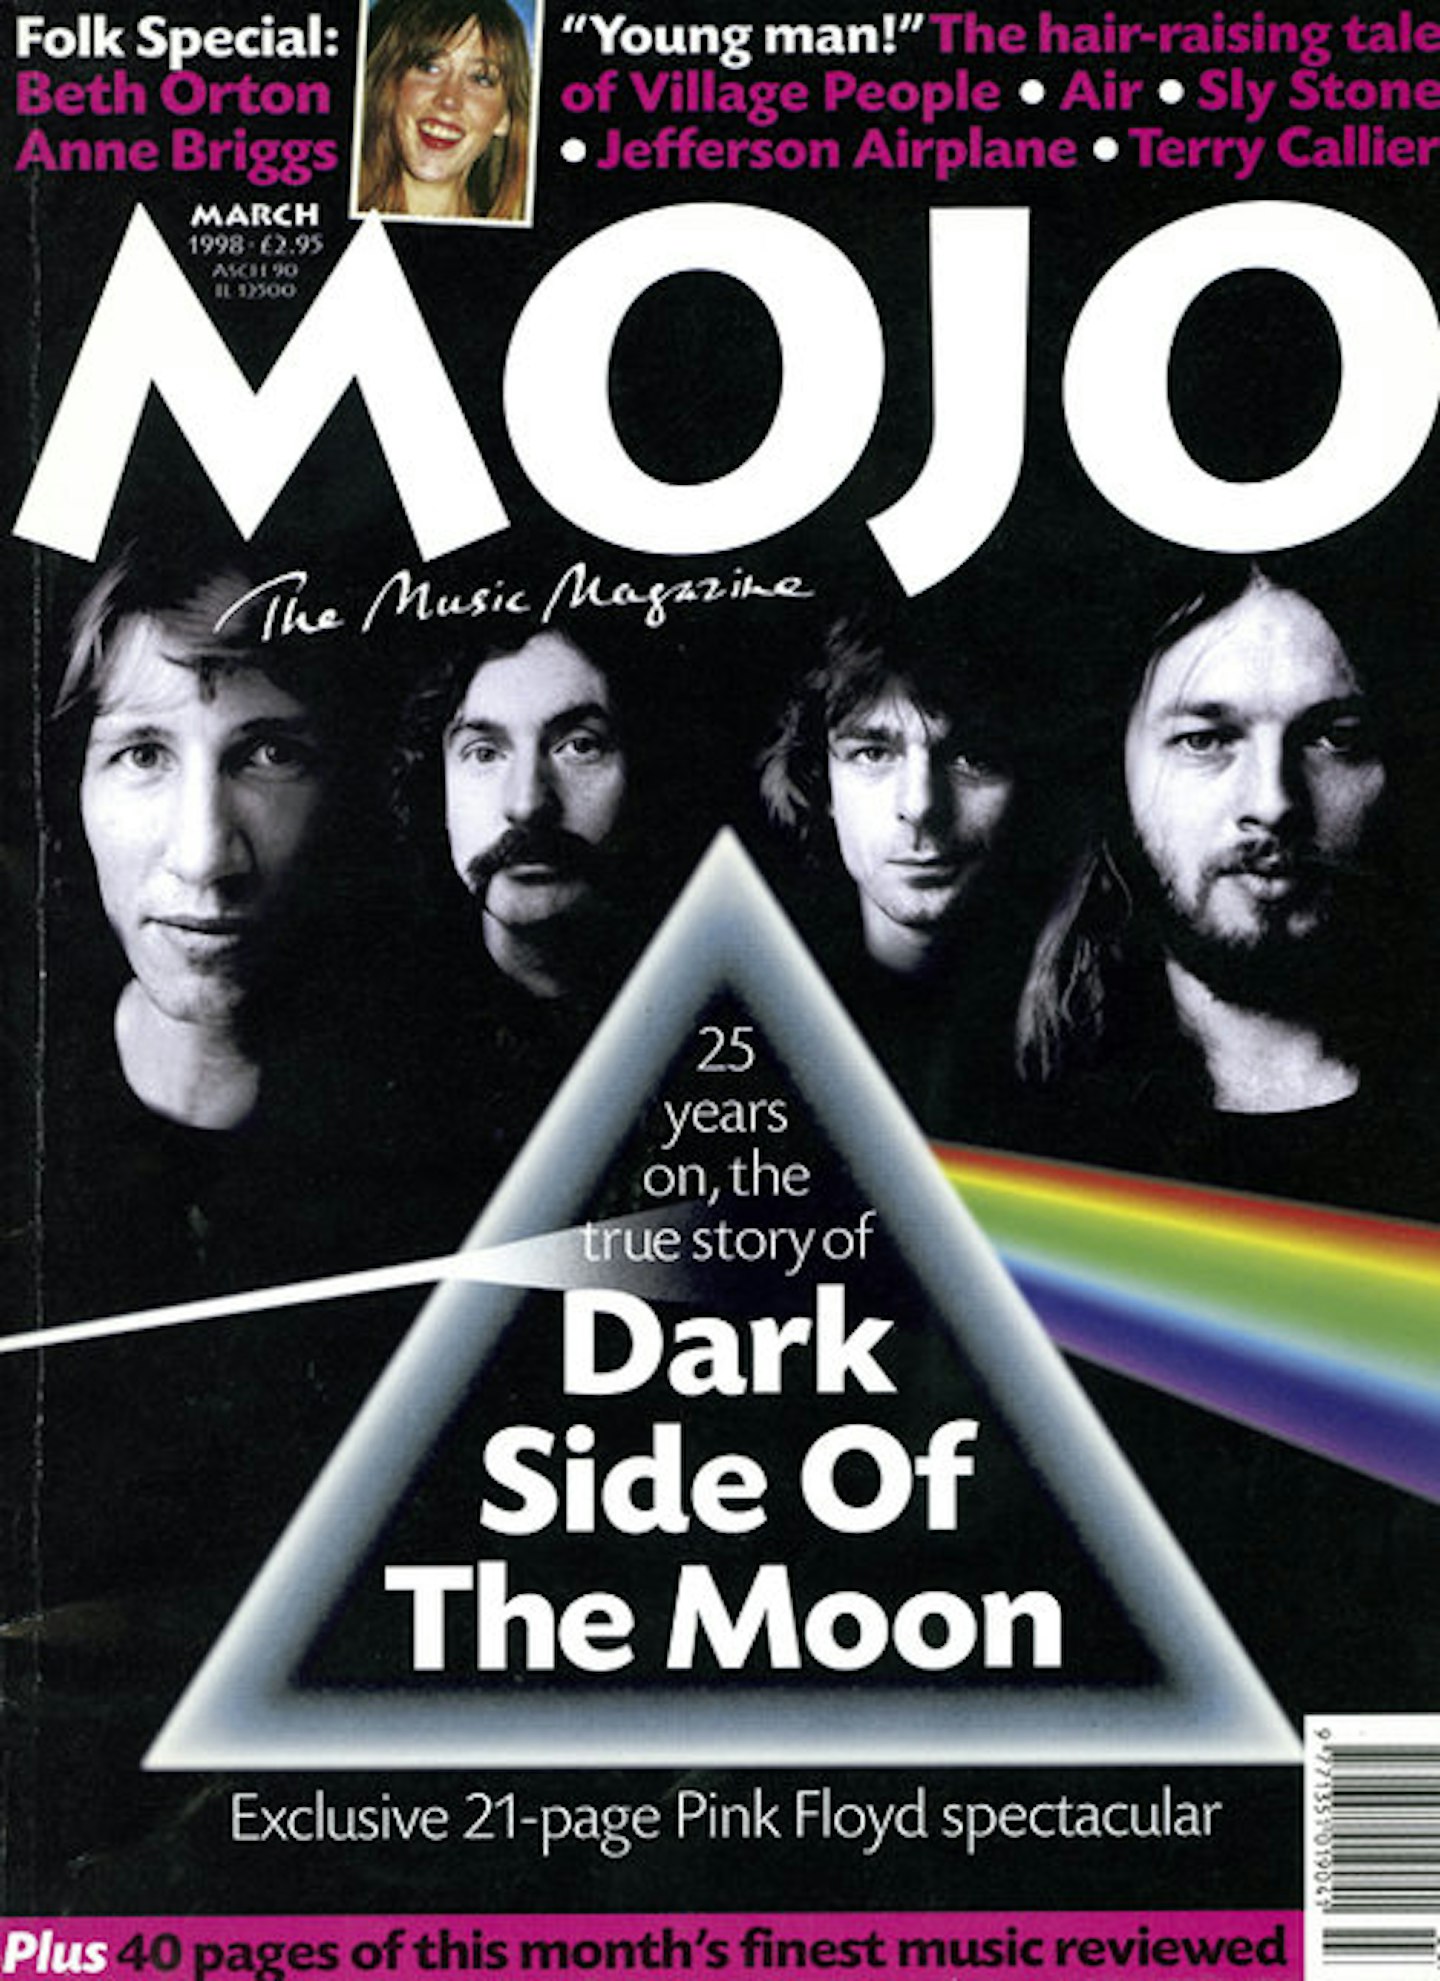 MOJO Issue 52 / March 1998